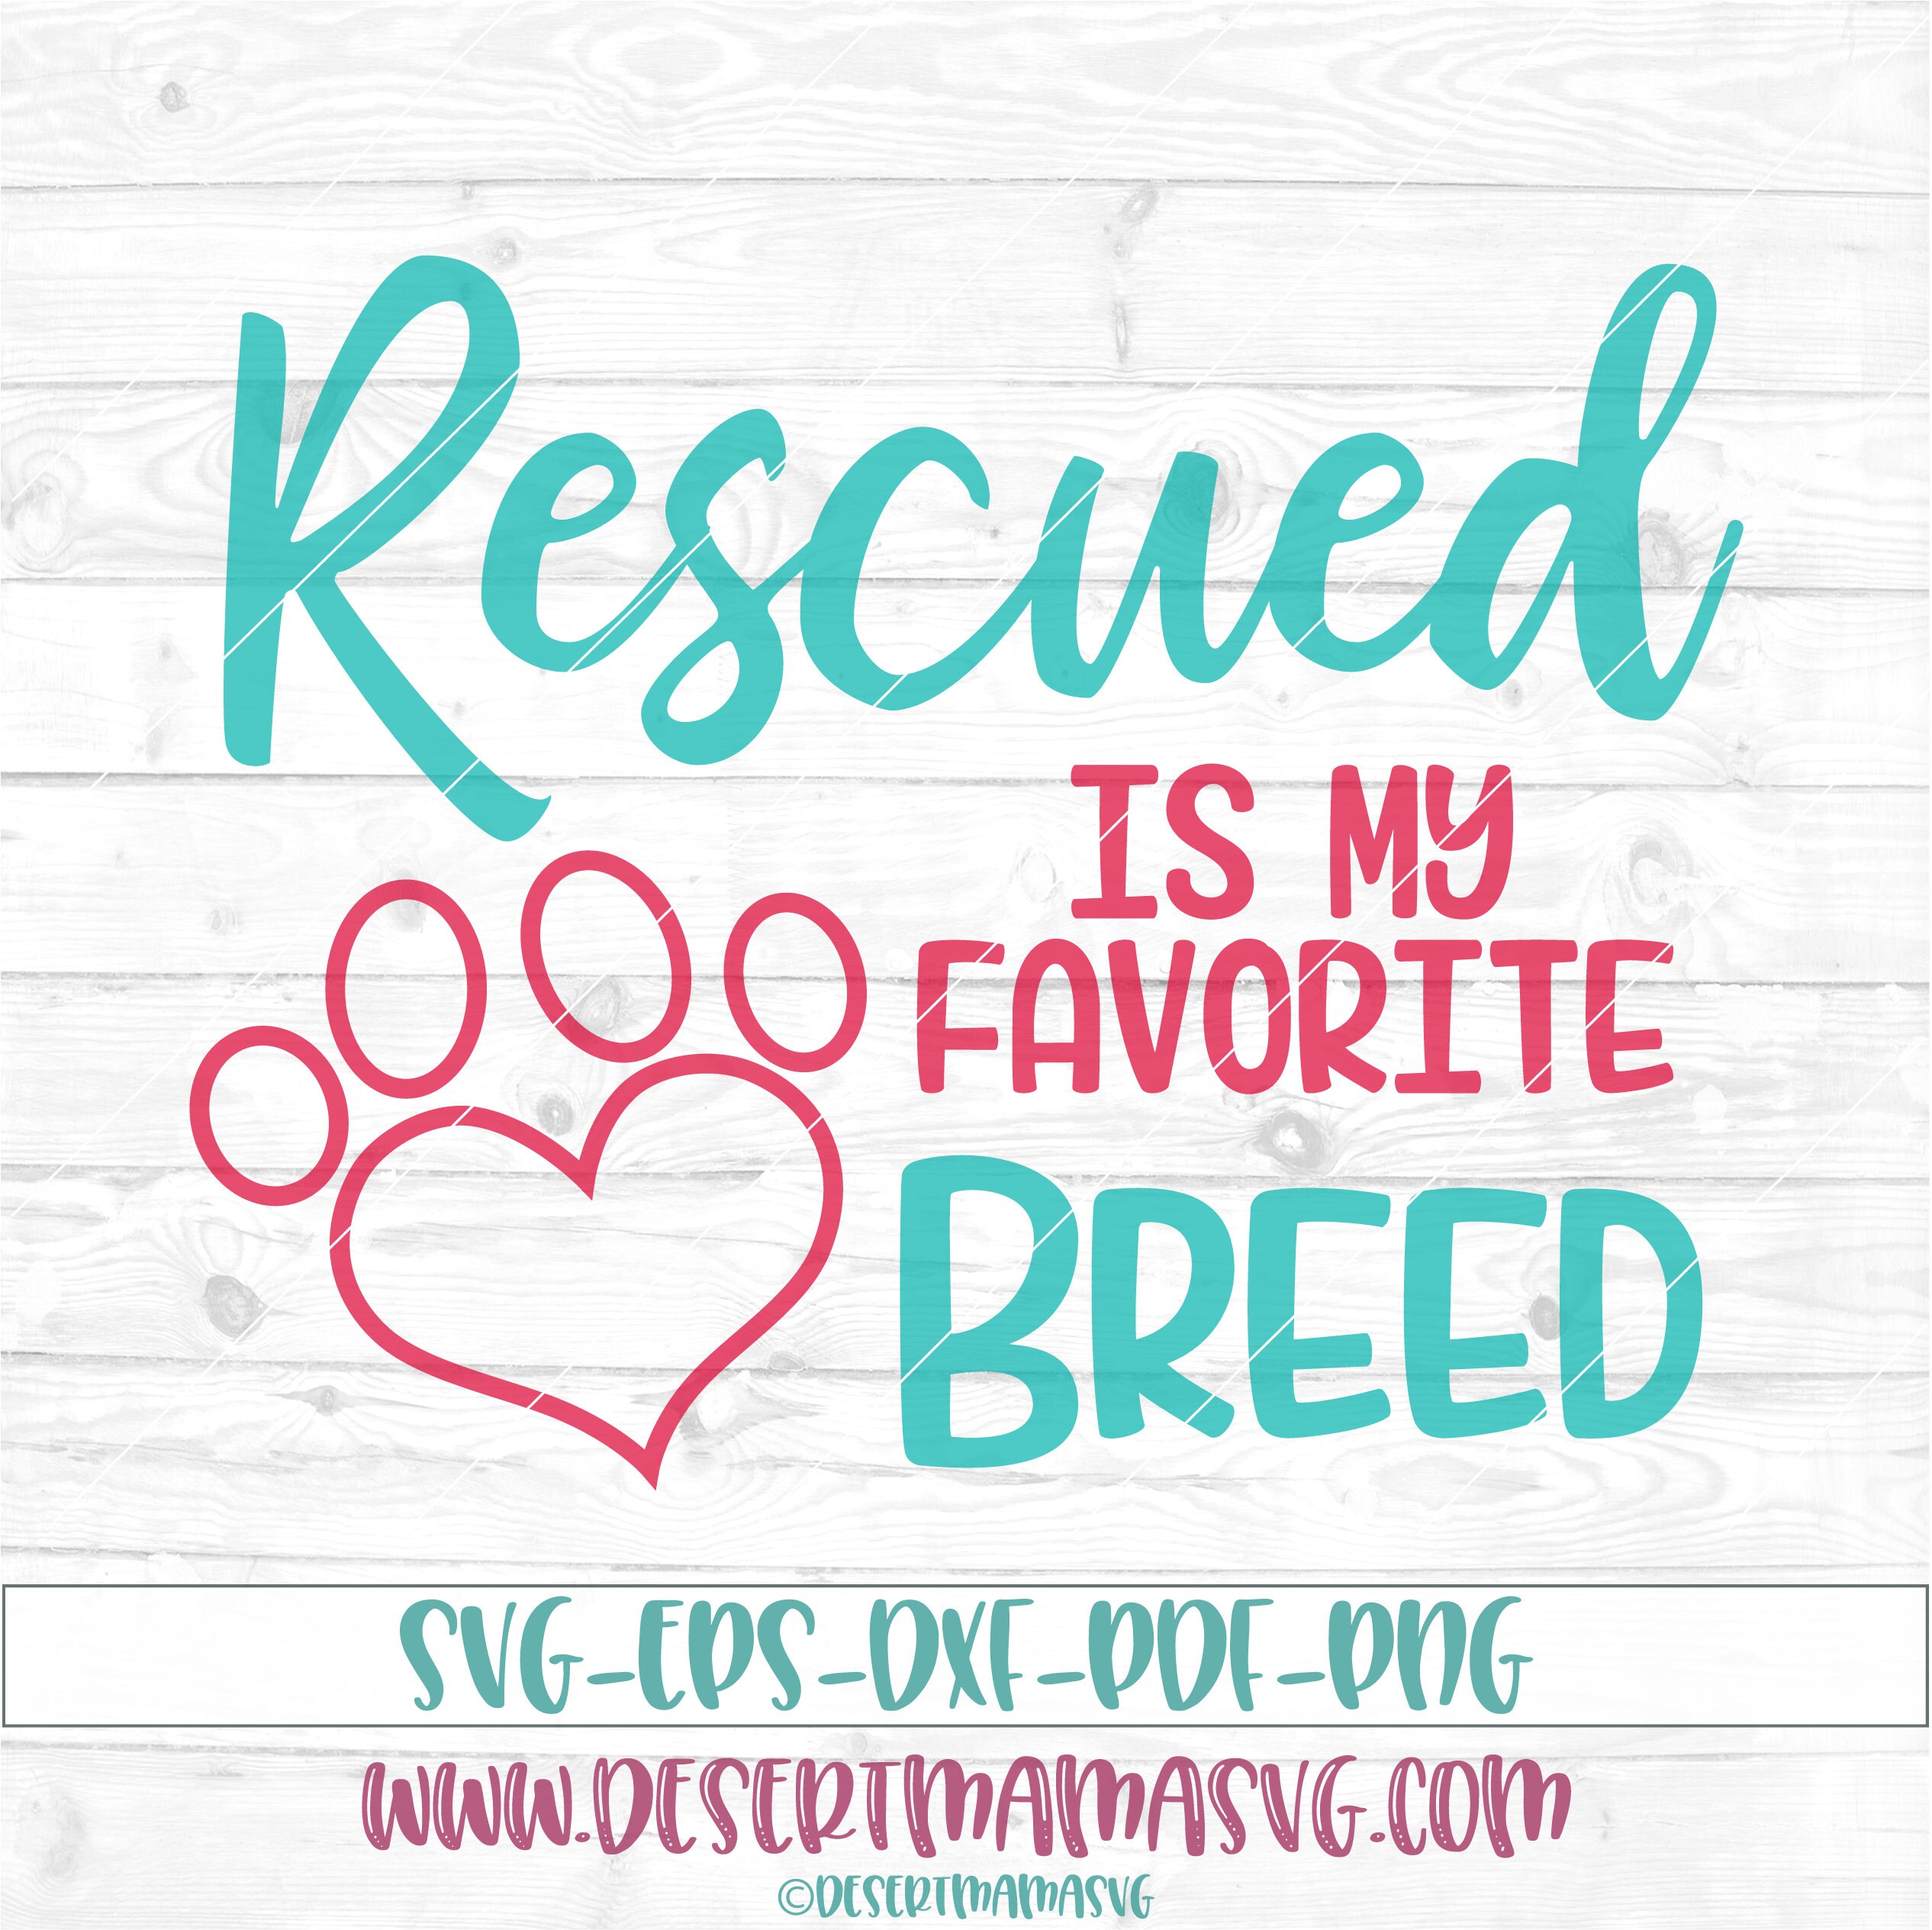 Rescued is my favorite breed svg dxf cricut cameo cut